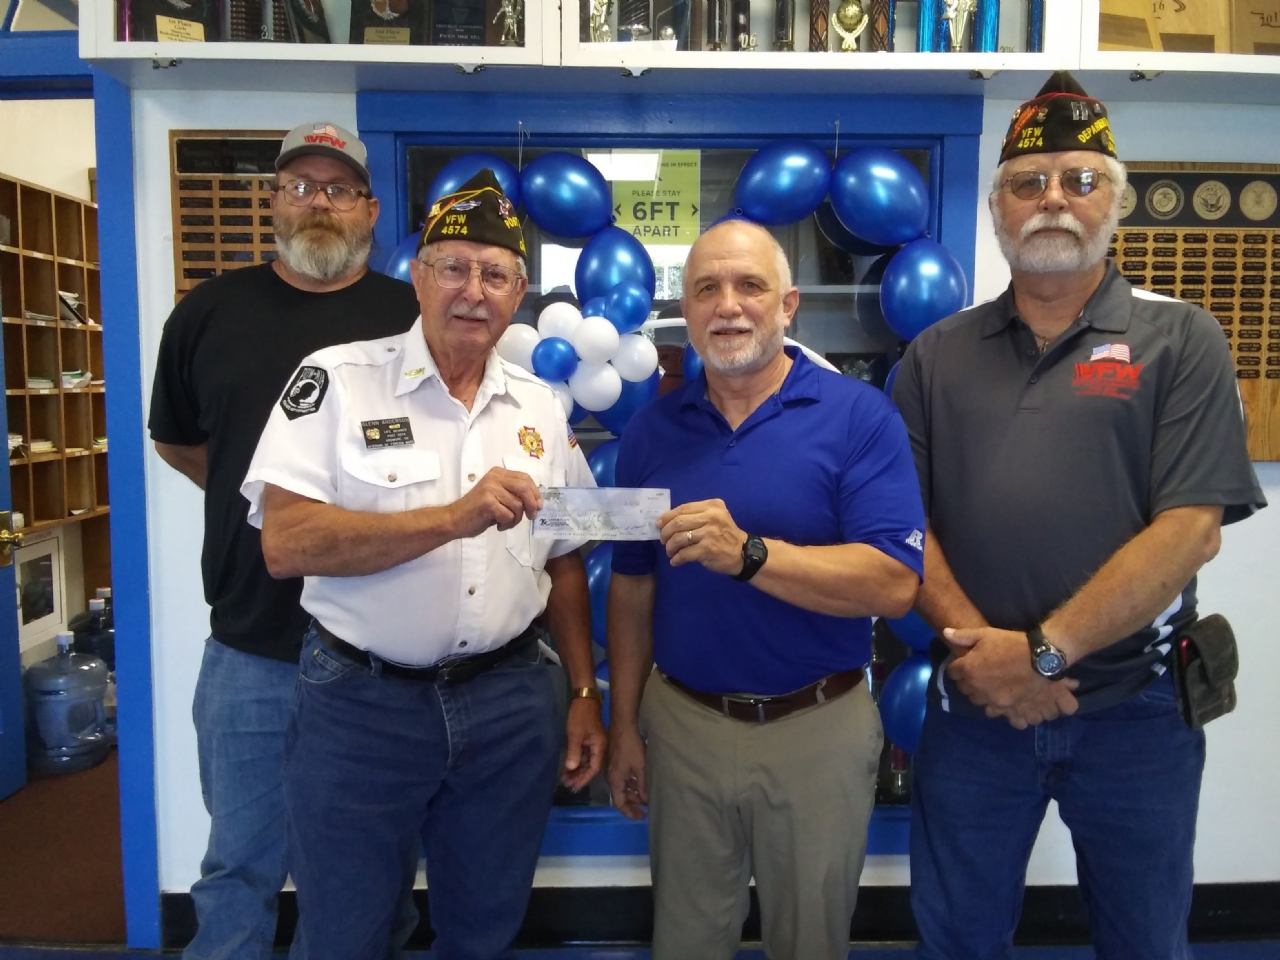 Carter County Memorial VFW Post 4574 was proud to present a $1000.00 check to Greenville Public Schools to help purchase classroom and school supplies this past Wednesday. 
  We appreciate the support of our Community through our various fundraisers. This allows us to not only help local Veterans but to put back into our Communities through our Youth Programs like this and our annual Voice of Democracy and Patriots Pen Essay Scholarship contest. We must continue to invest in the future of our youth. Thank You Greenville Schools for allowing us to do so.